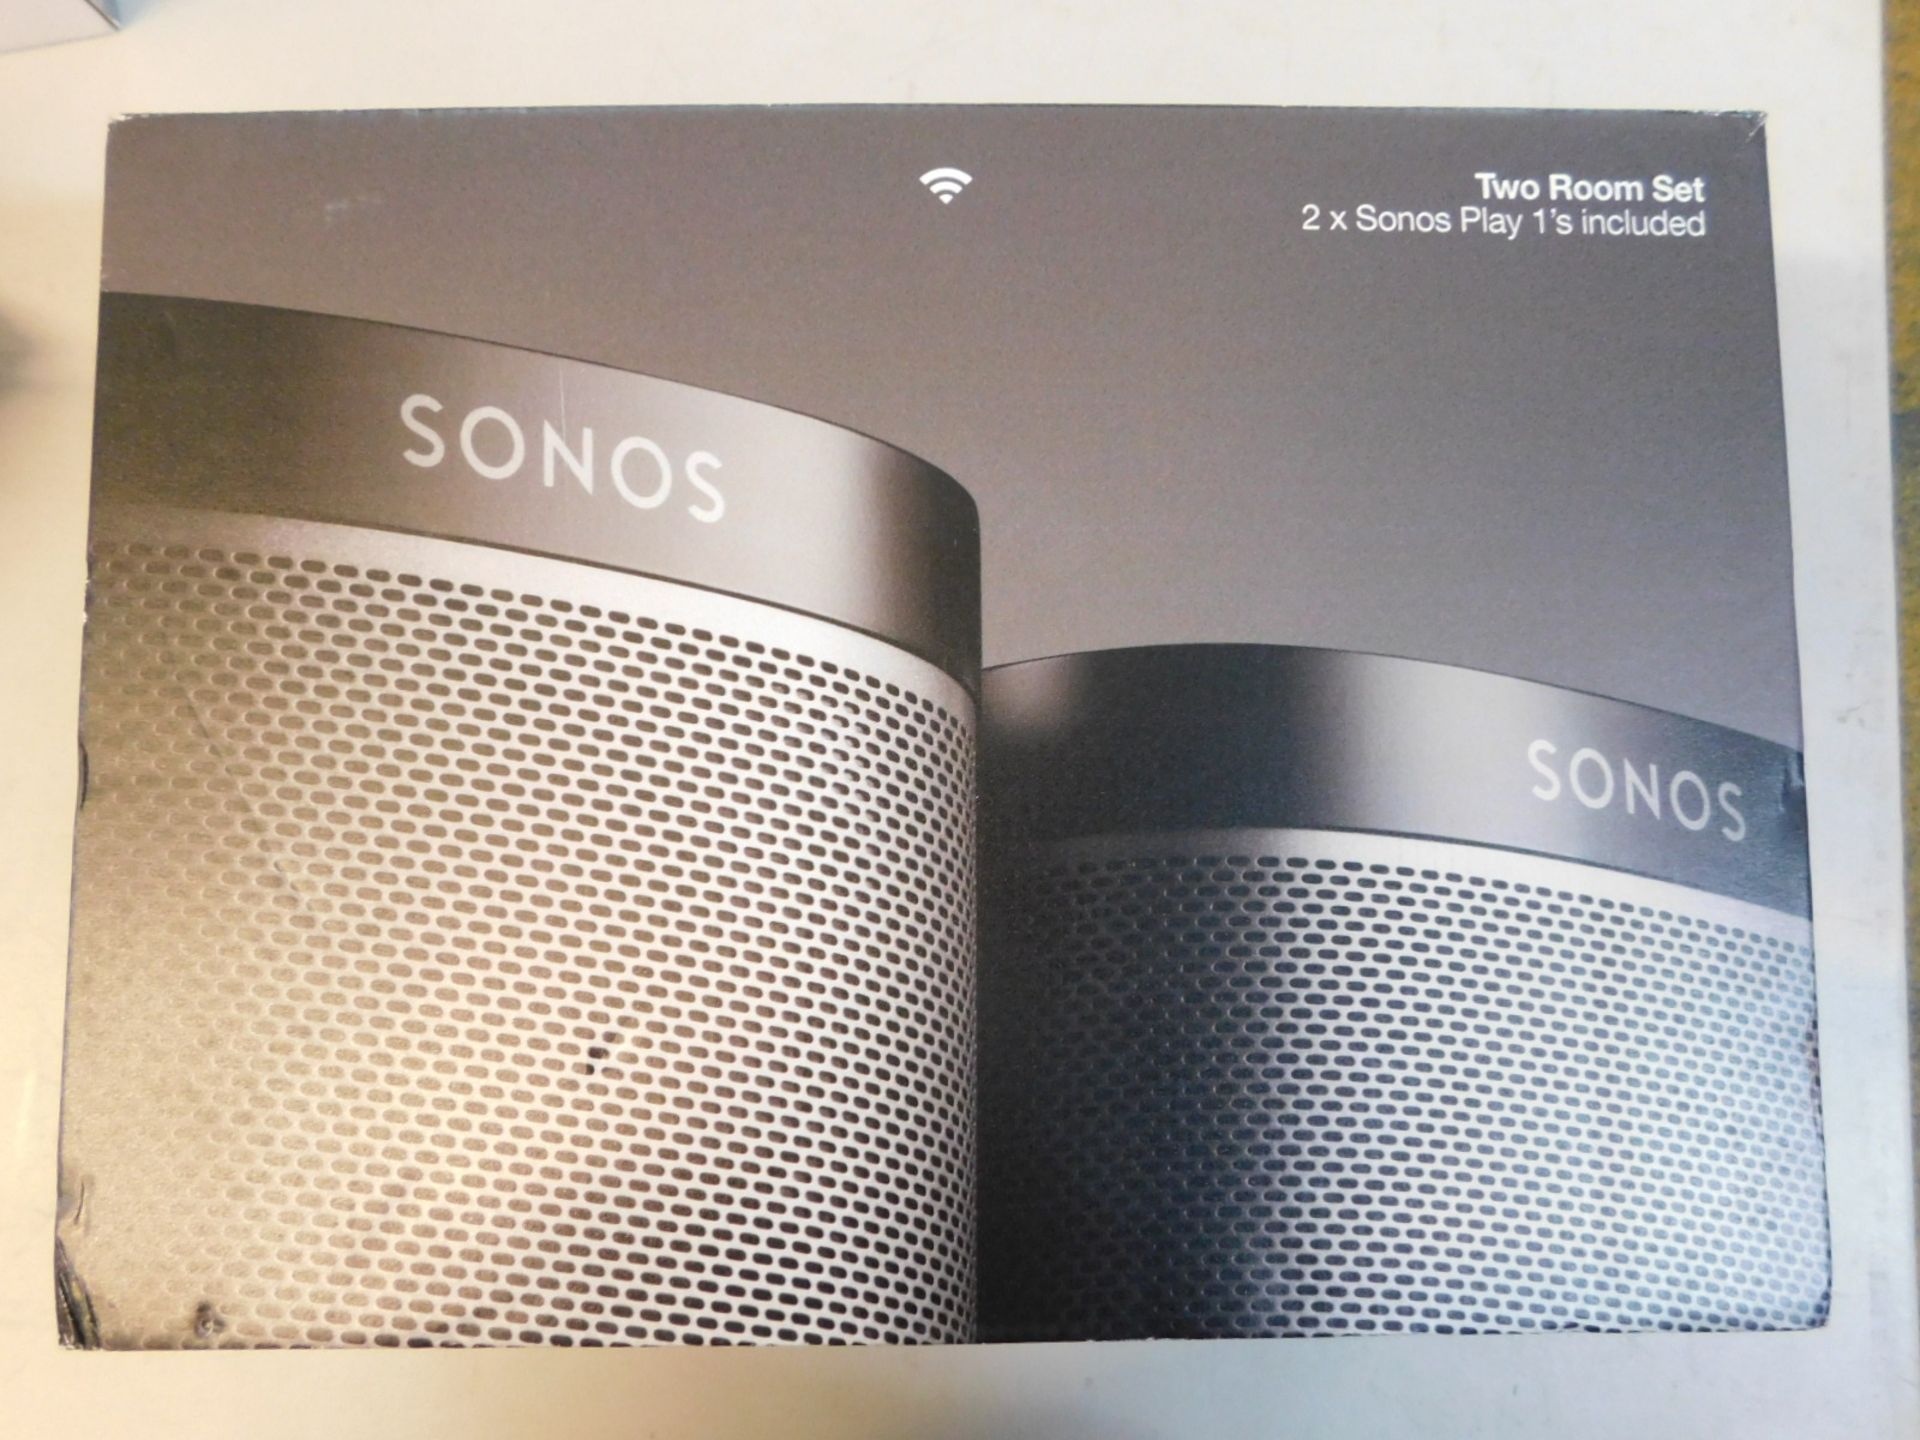 1 BOXED SONOS PLAY 1S TWO ROOM SET UP SPEAKER HOME CINEMA SURROUND SOUND SYSTEM RRP £299